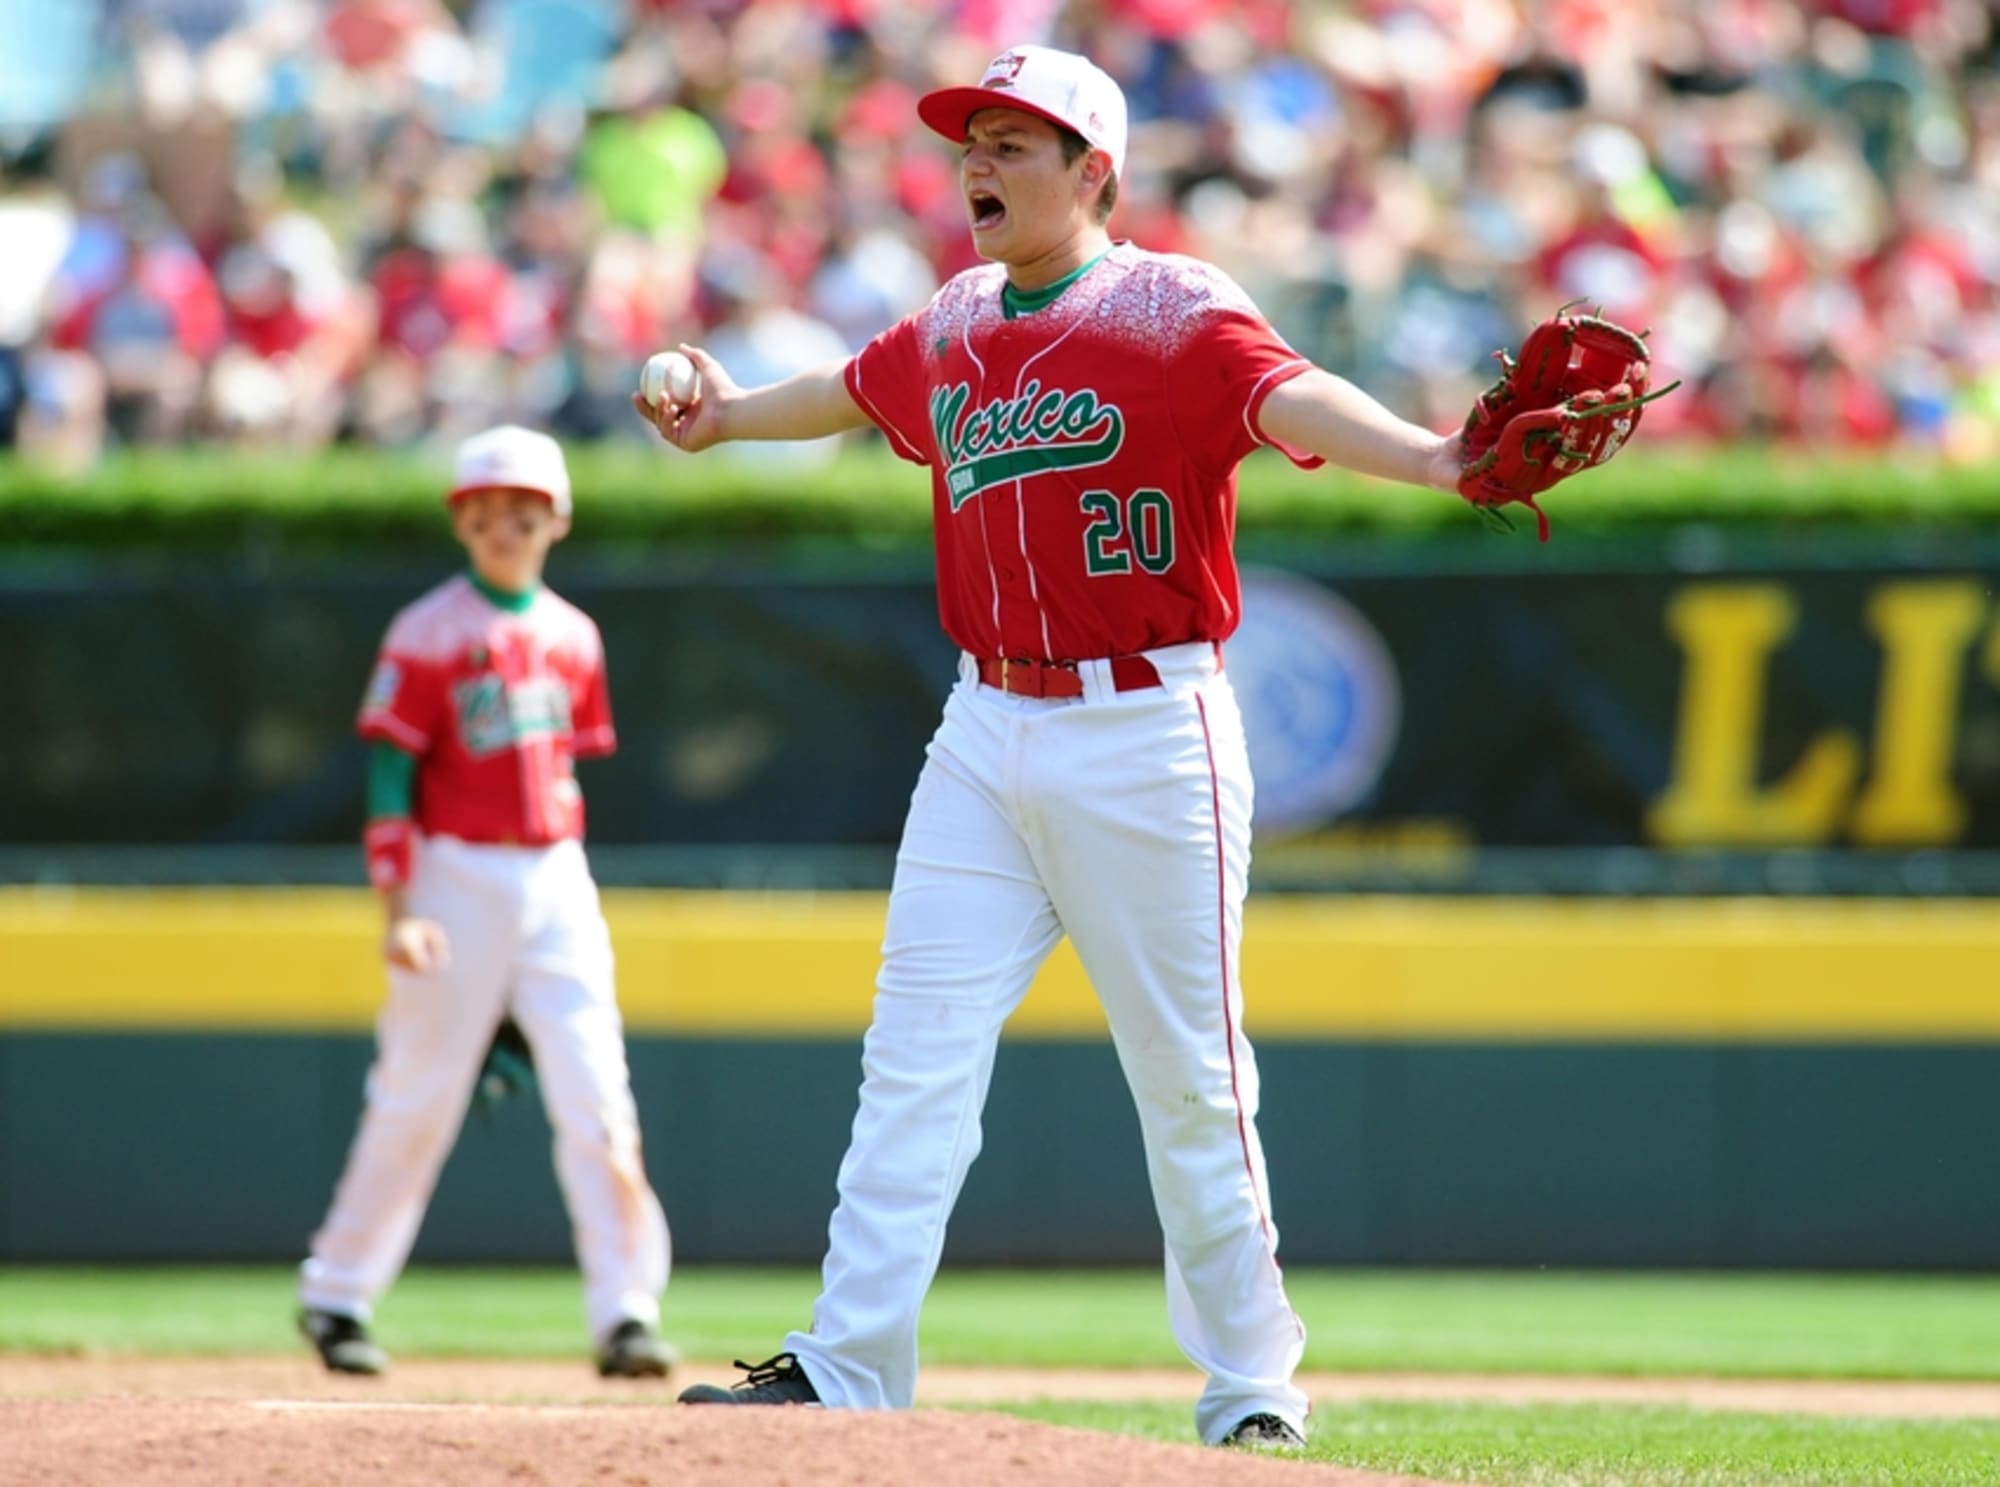 Mexico’s pitcher oozes swag in LLWS International title game